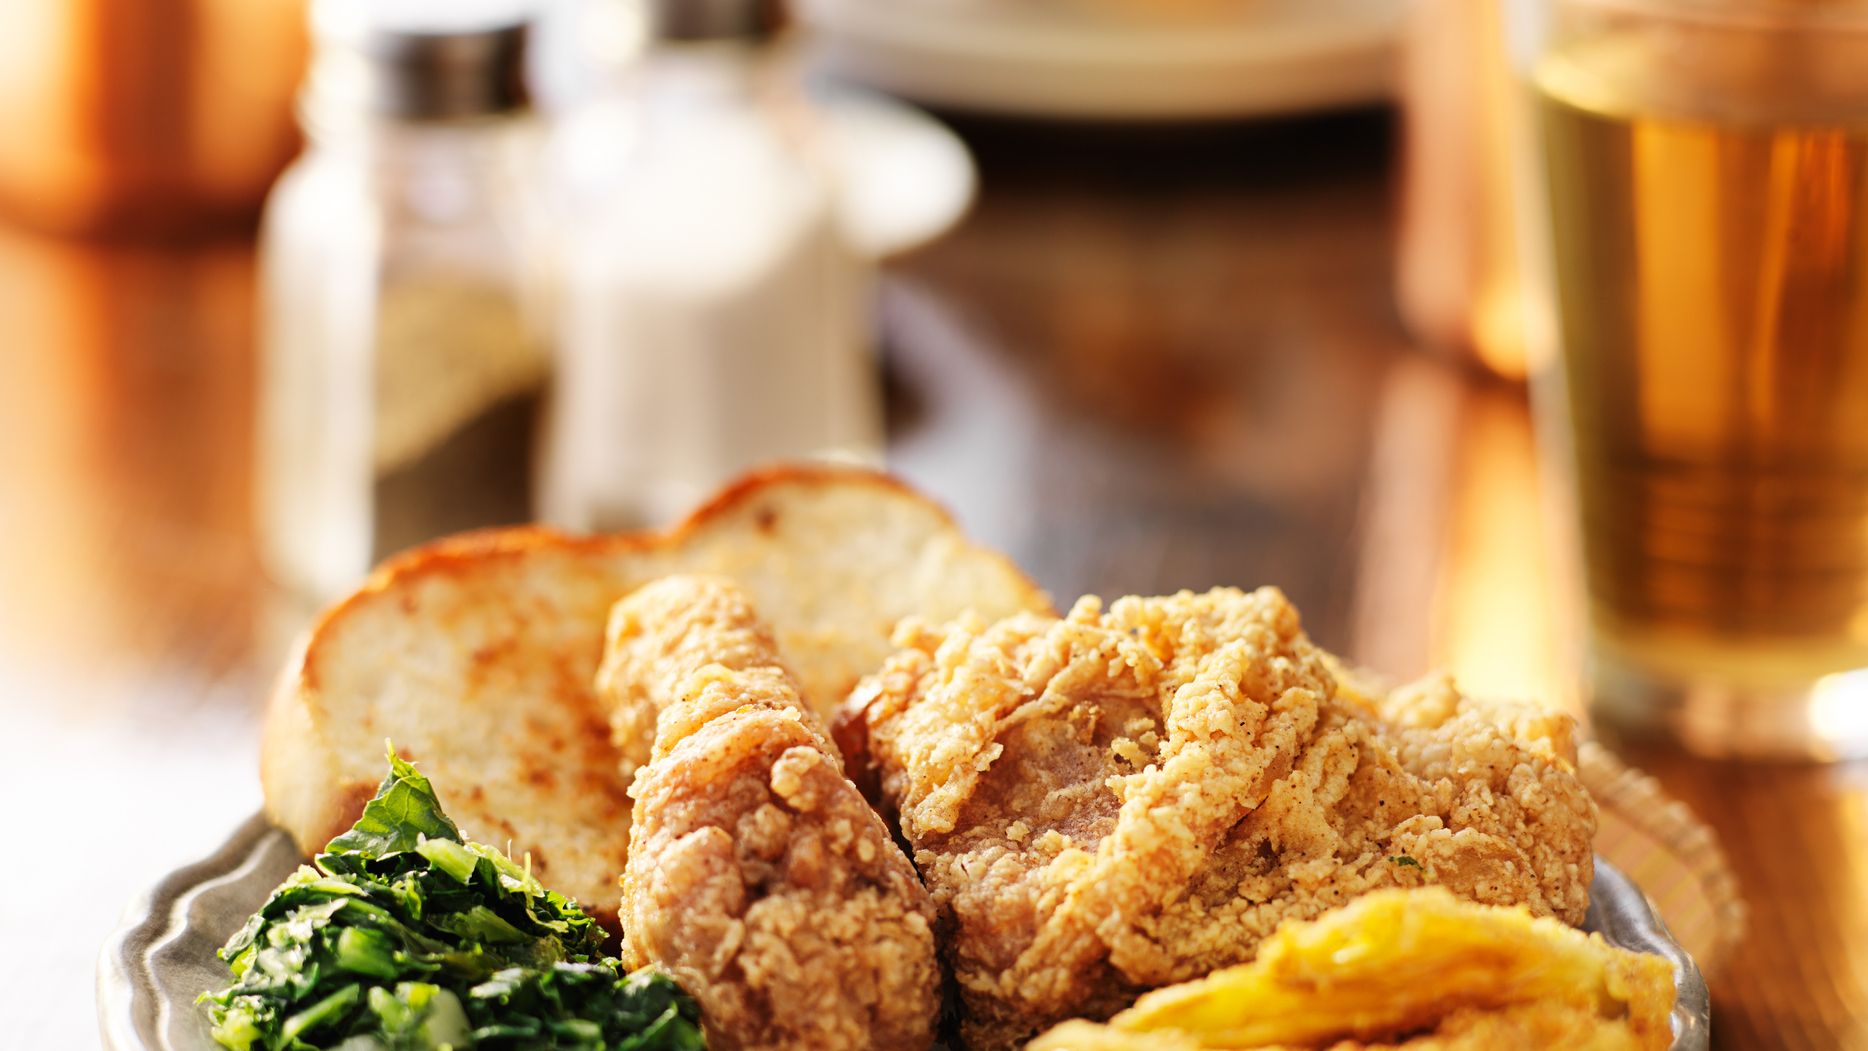 https://hips.hearstapps.com/hmg-prod/images/southern-soul-food-with-fried-chicken-and-collard-royalty-free-image-498272540-1550241756.jpg?crop=1xw:0.65491xh;center,top